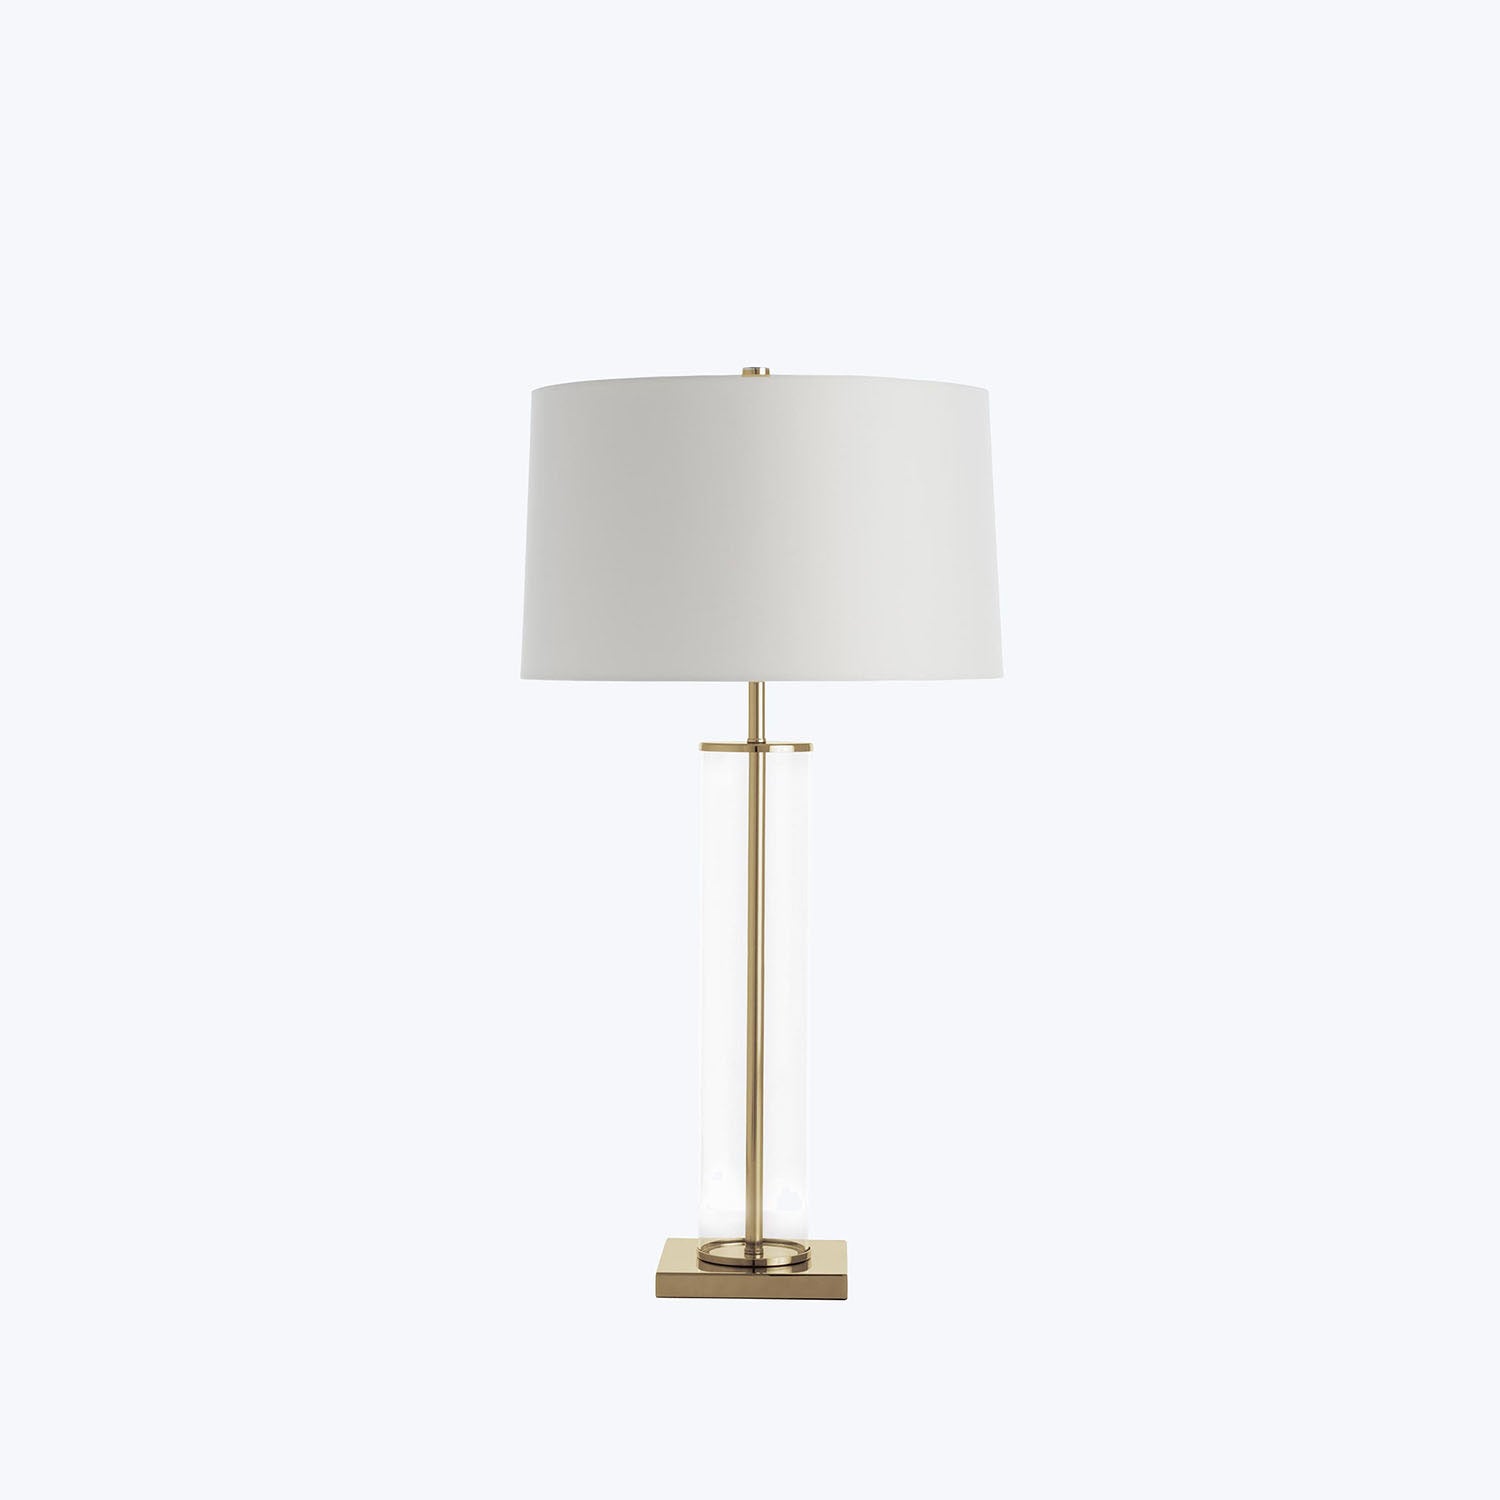 Minimalist table lamp with metallic base, transparent cylinder, and round lampshade.